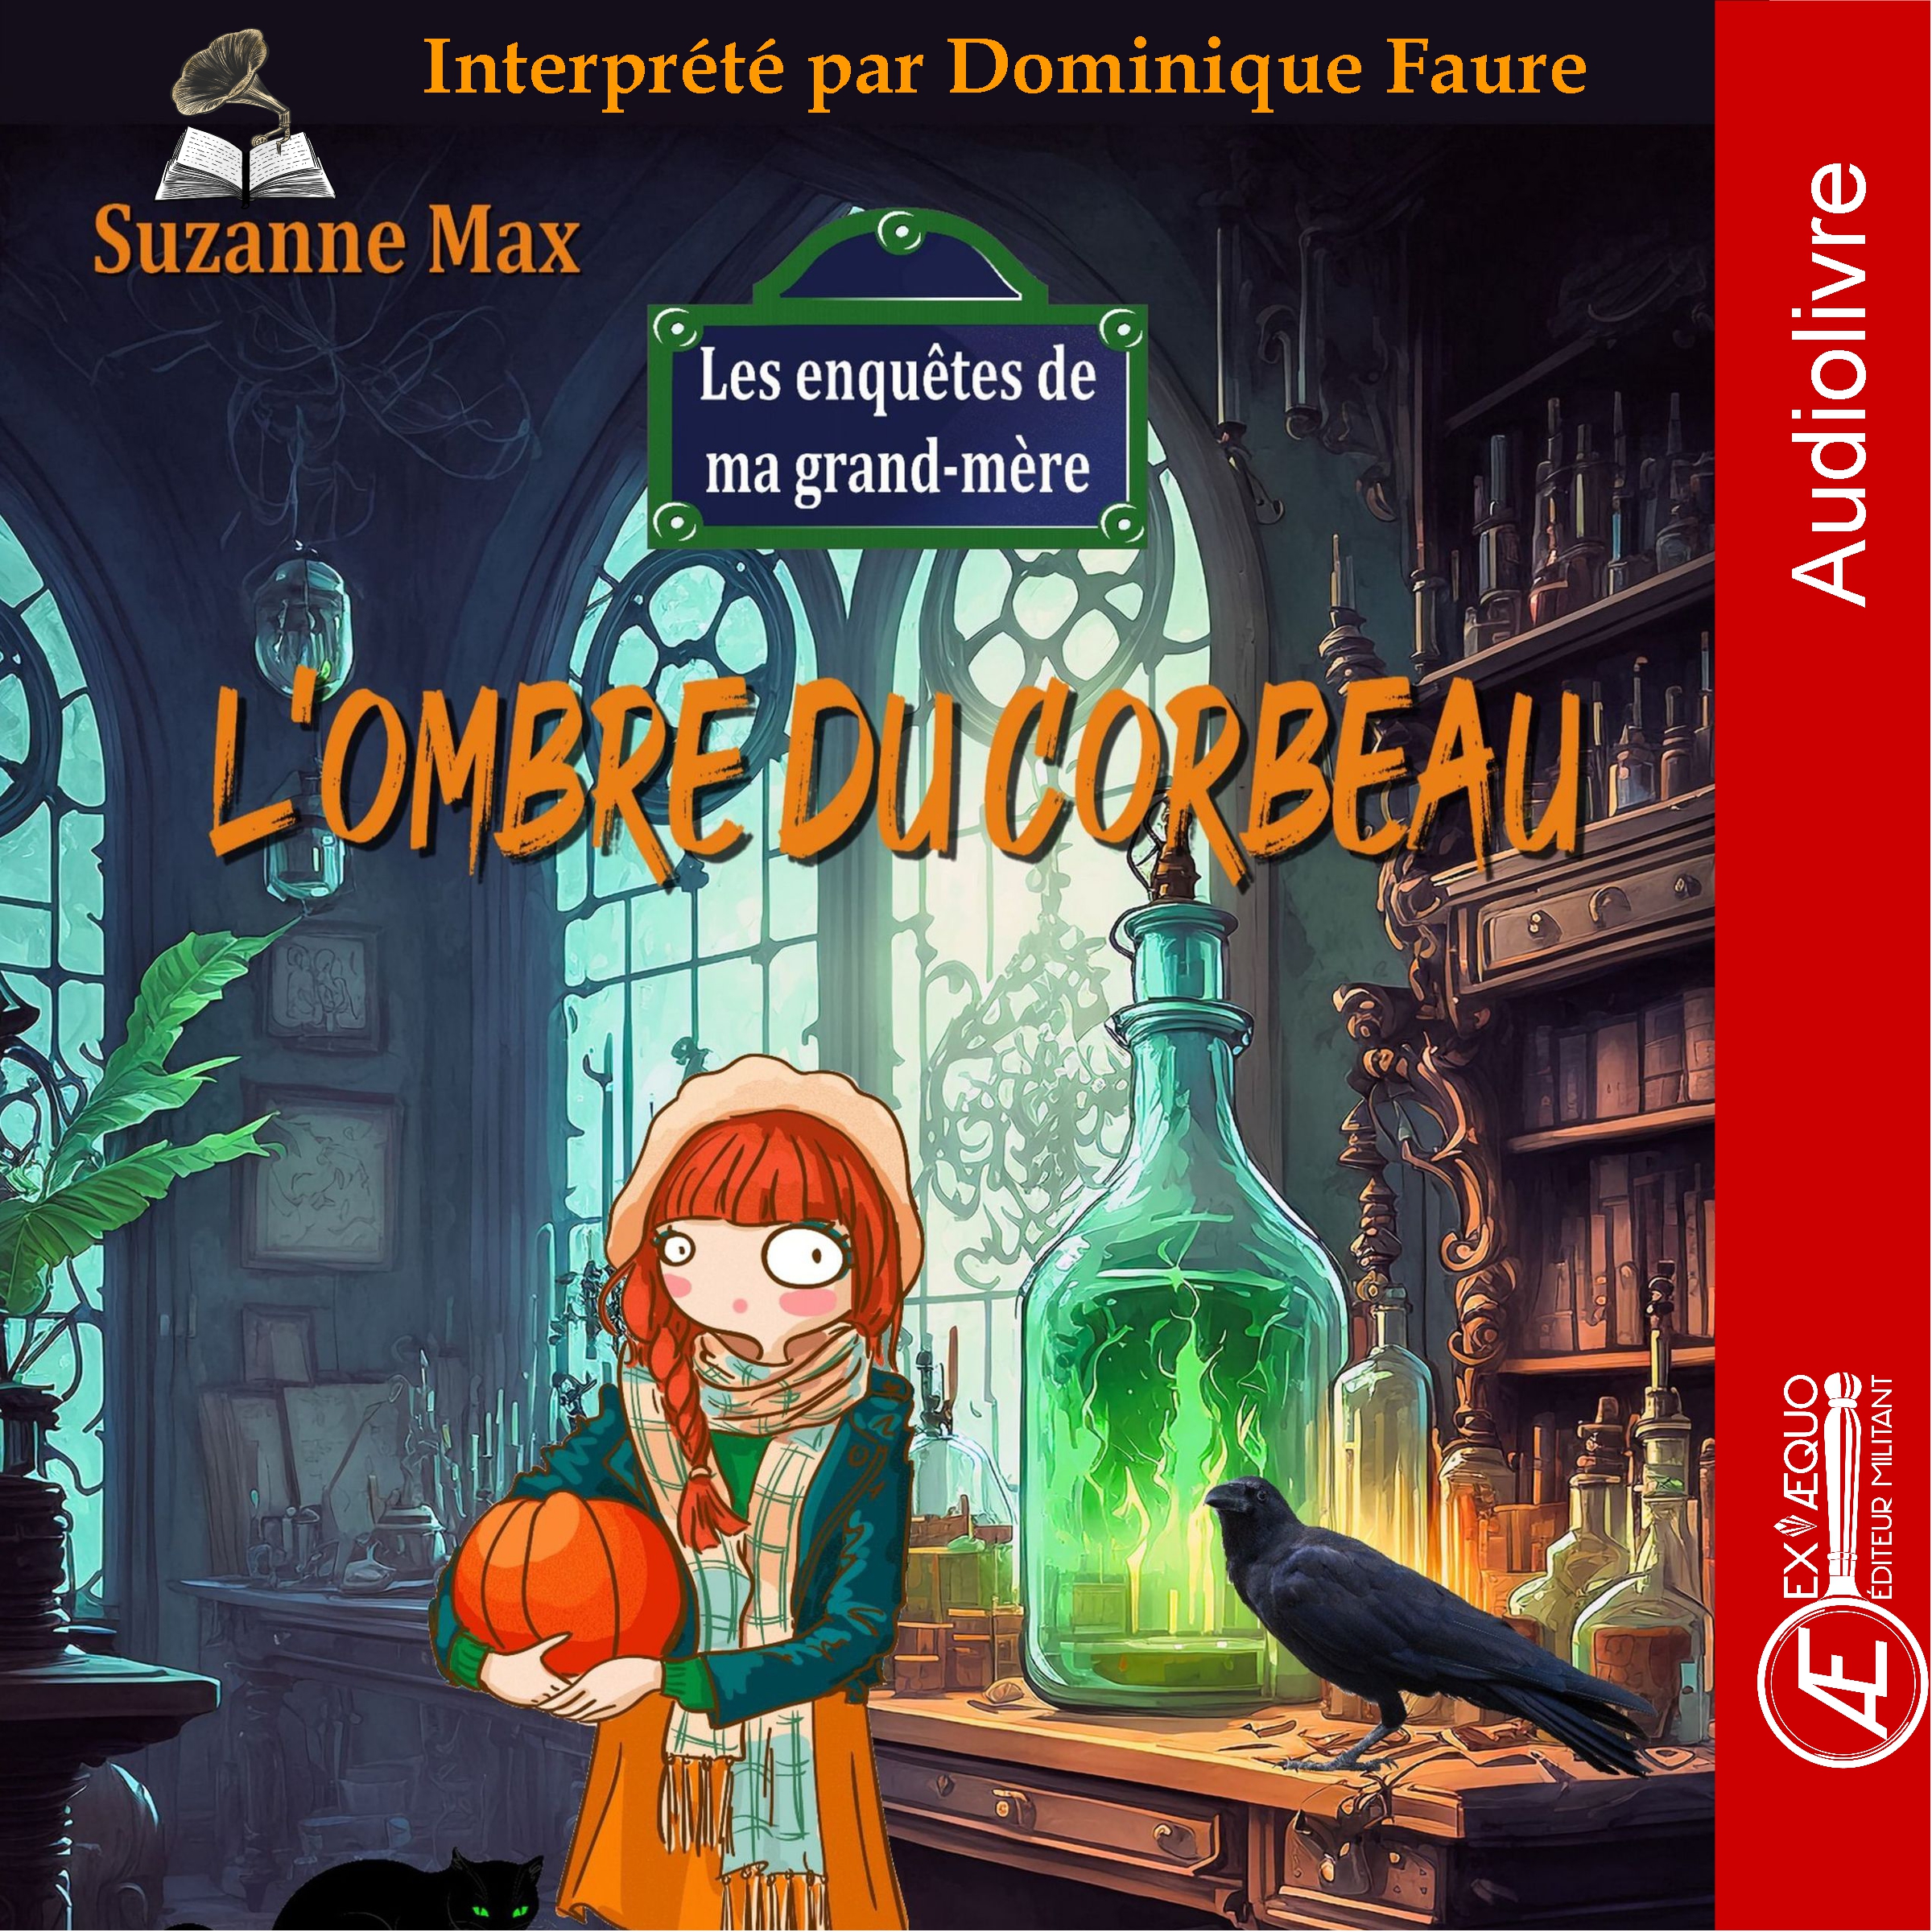 You are currently viewing L’ombre du corbeau – Audiolivre